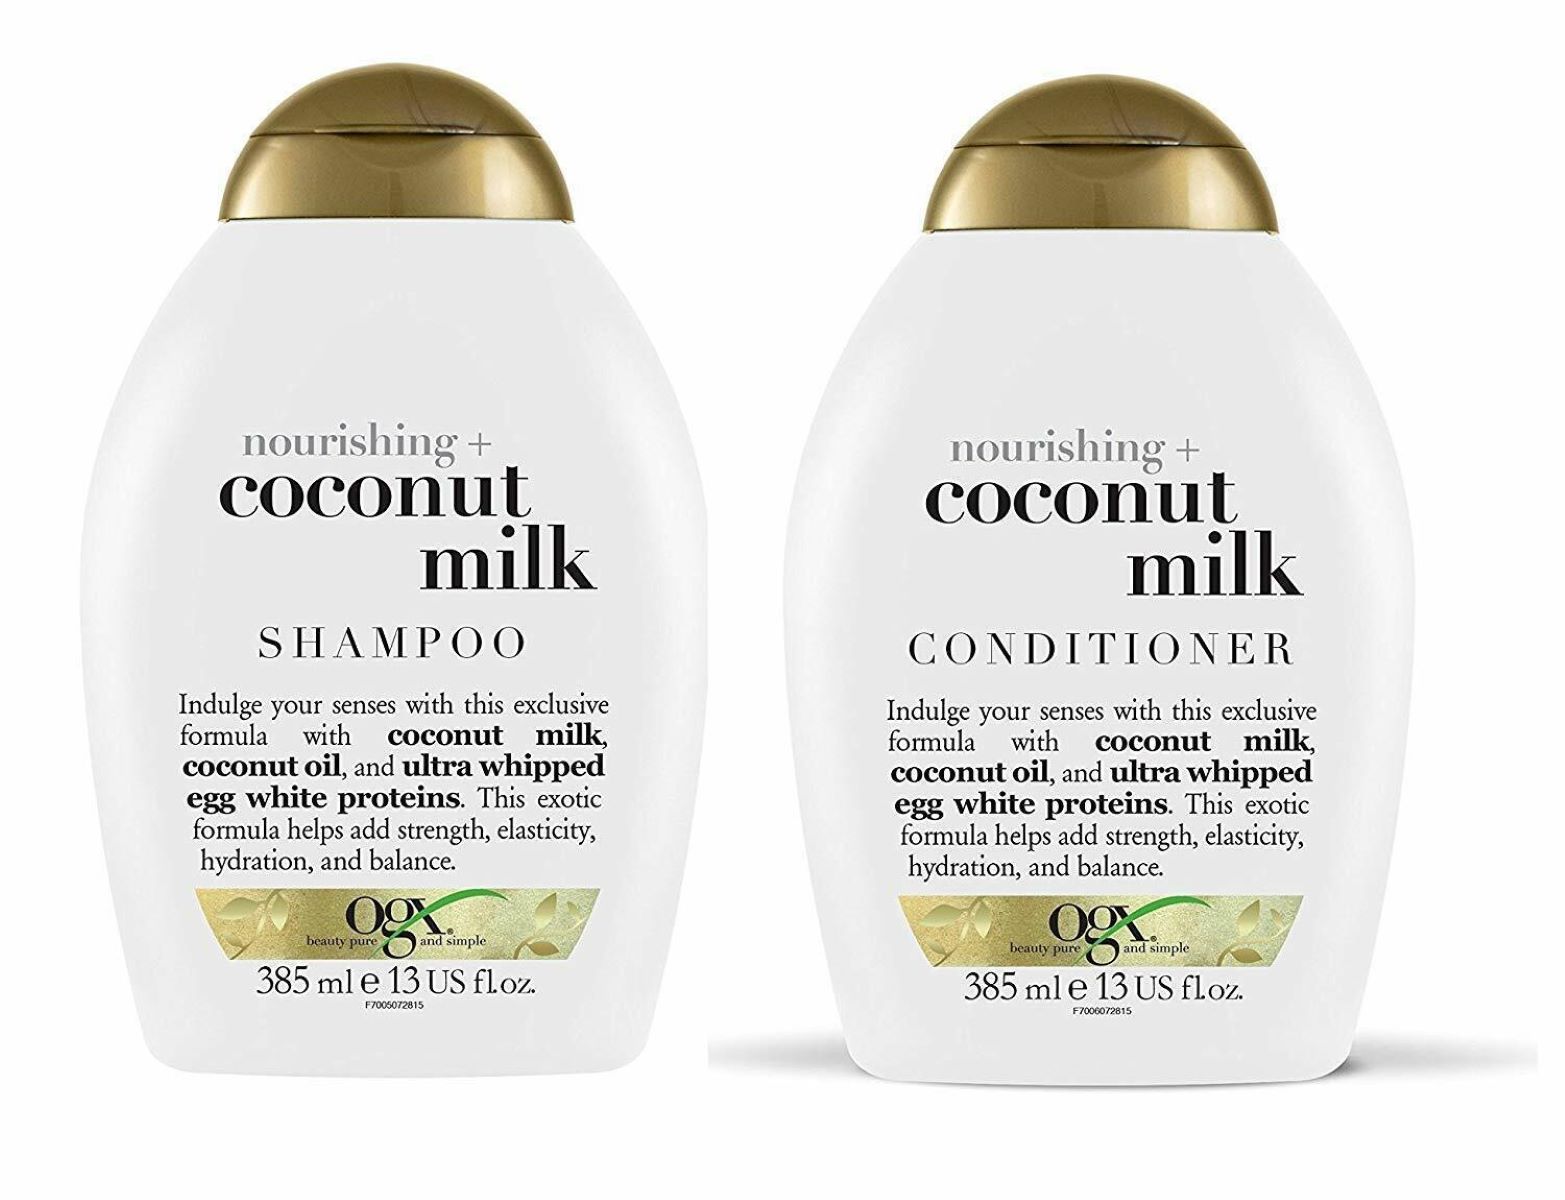 Discover The Amazing Benefits Of OGX Shampoo And Conditioner For Your Hair!